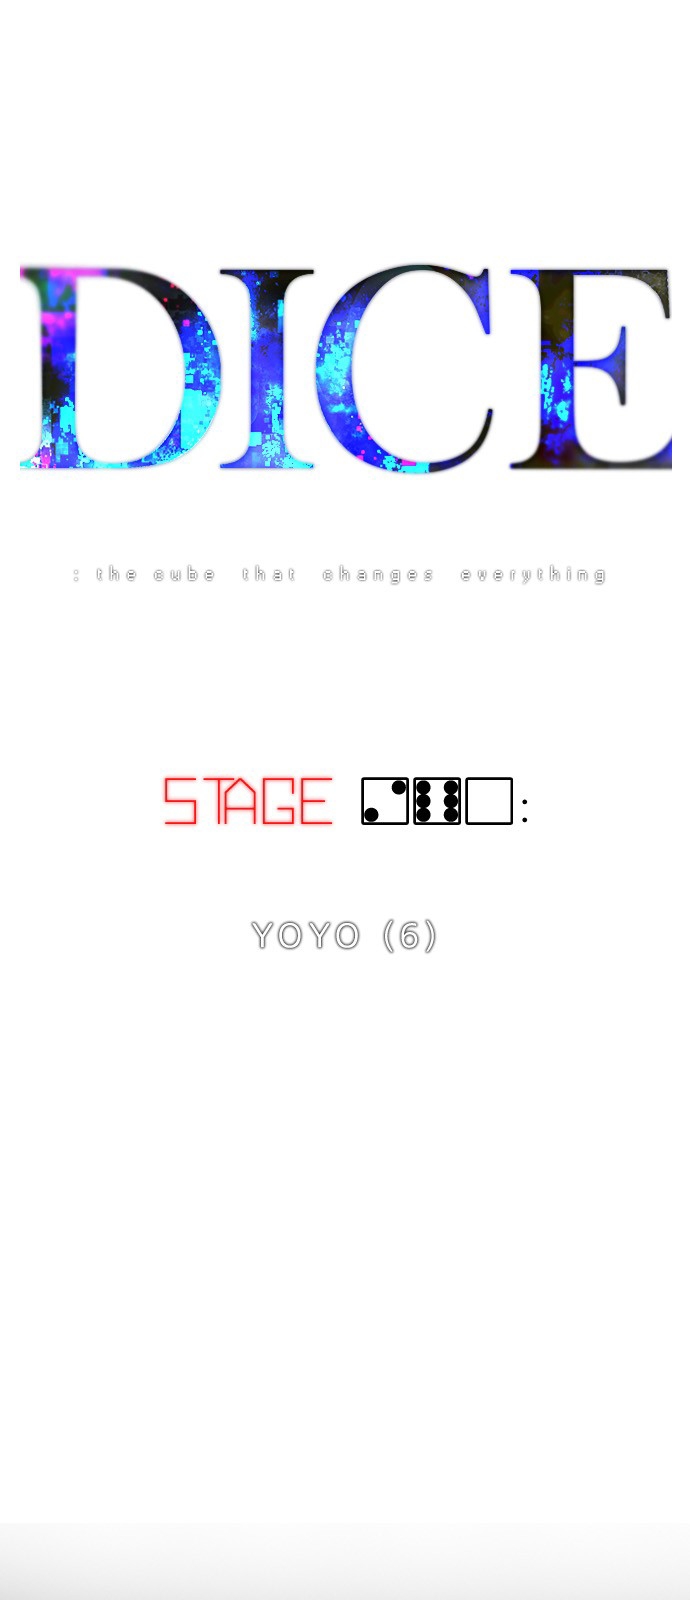 DICE: The Cube that Changes Everything Ch. 260 YOYO (6)